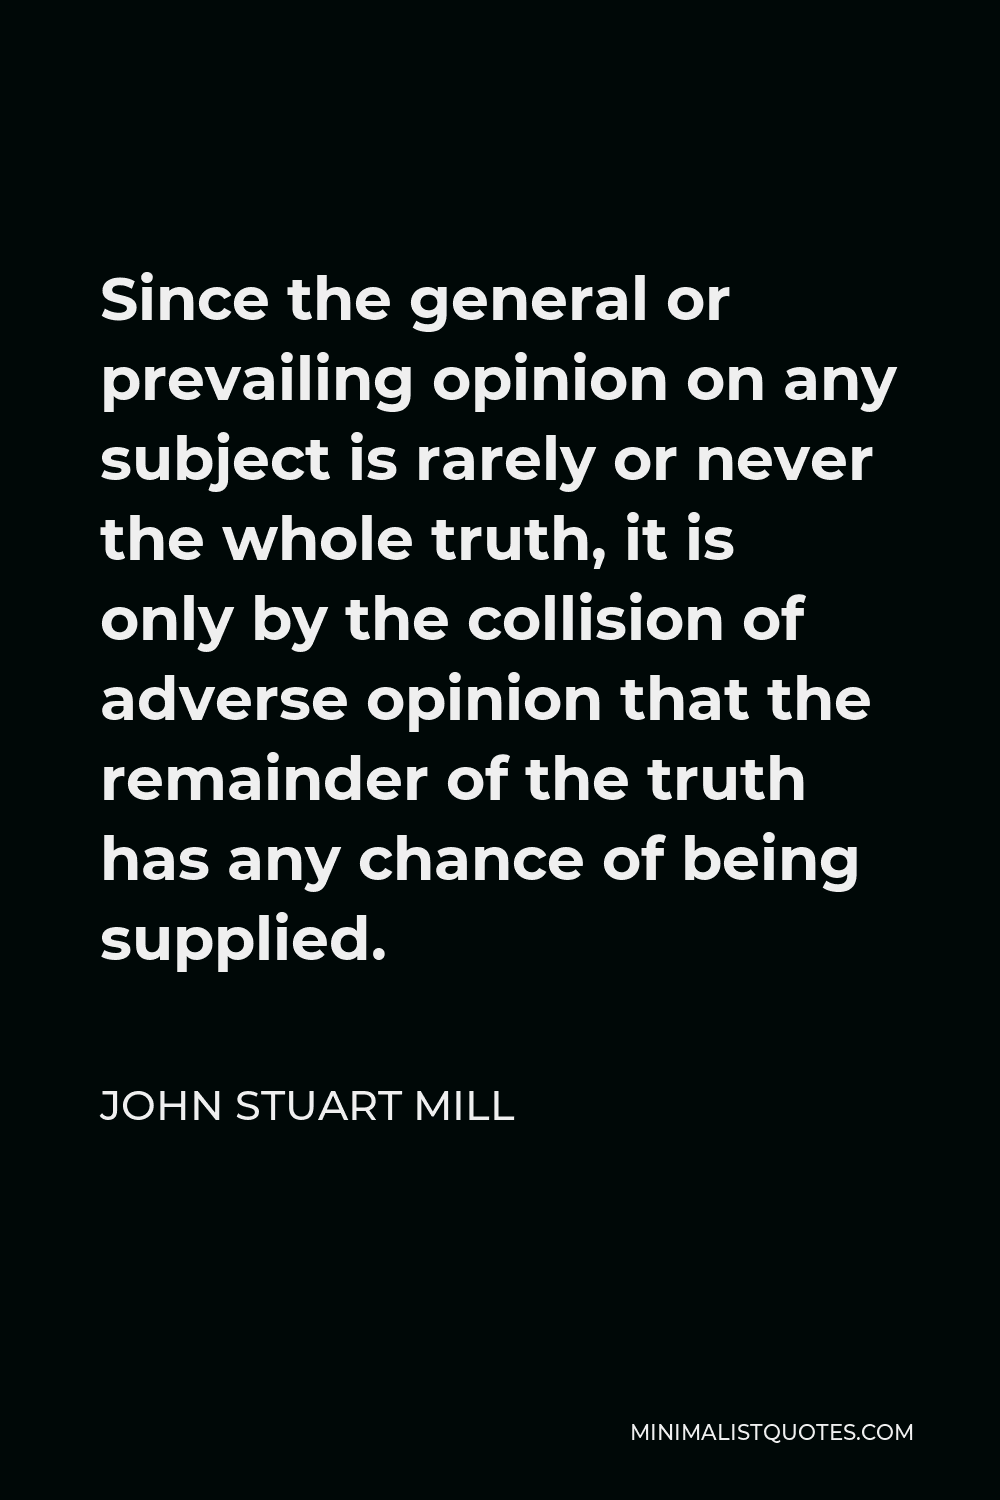 John Stuart Mill Quote - Since the general or prevailing opinion on any subject is rarely or never the whole truth, it is only by the collision of adverse opinion that the remainder of the truth has any chance of being supplied.